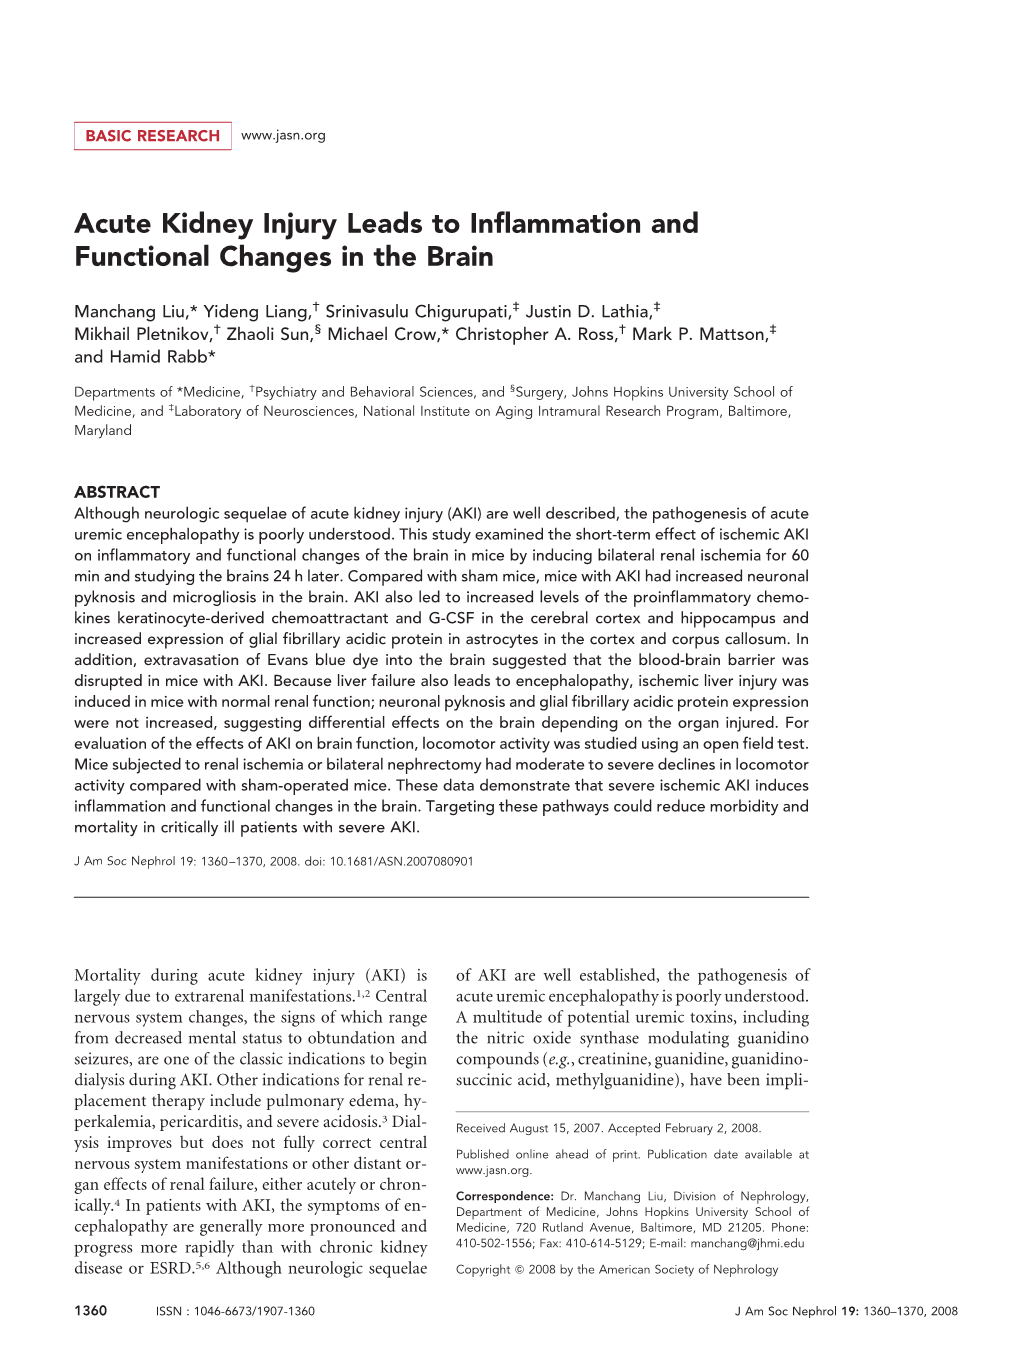 Acute Kidney Injury Leads to Inflammation and Functional Changes in the Brain